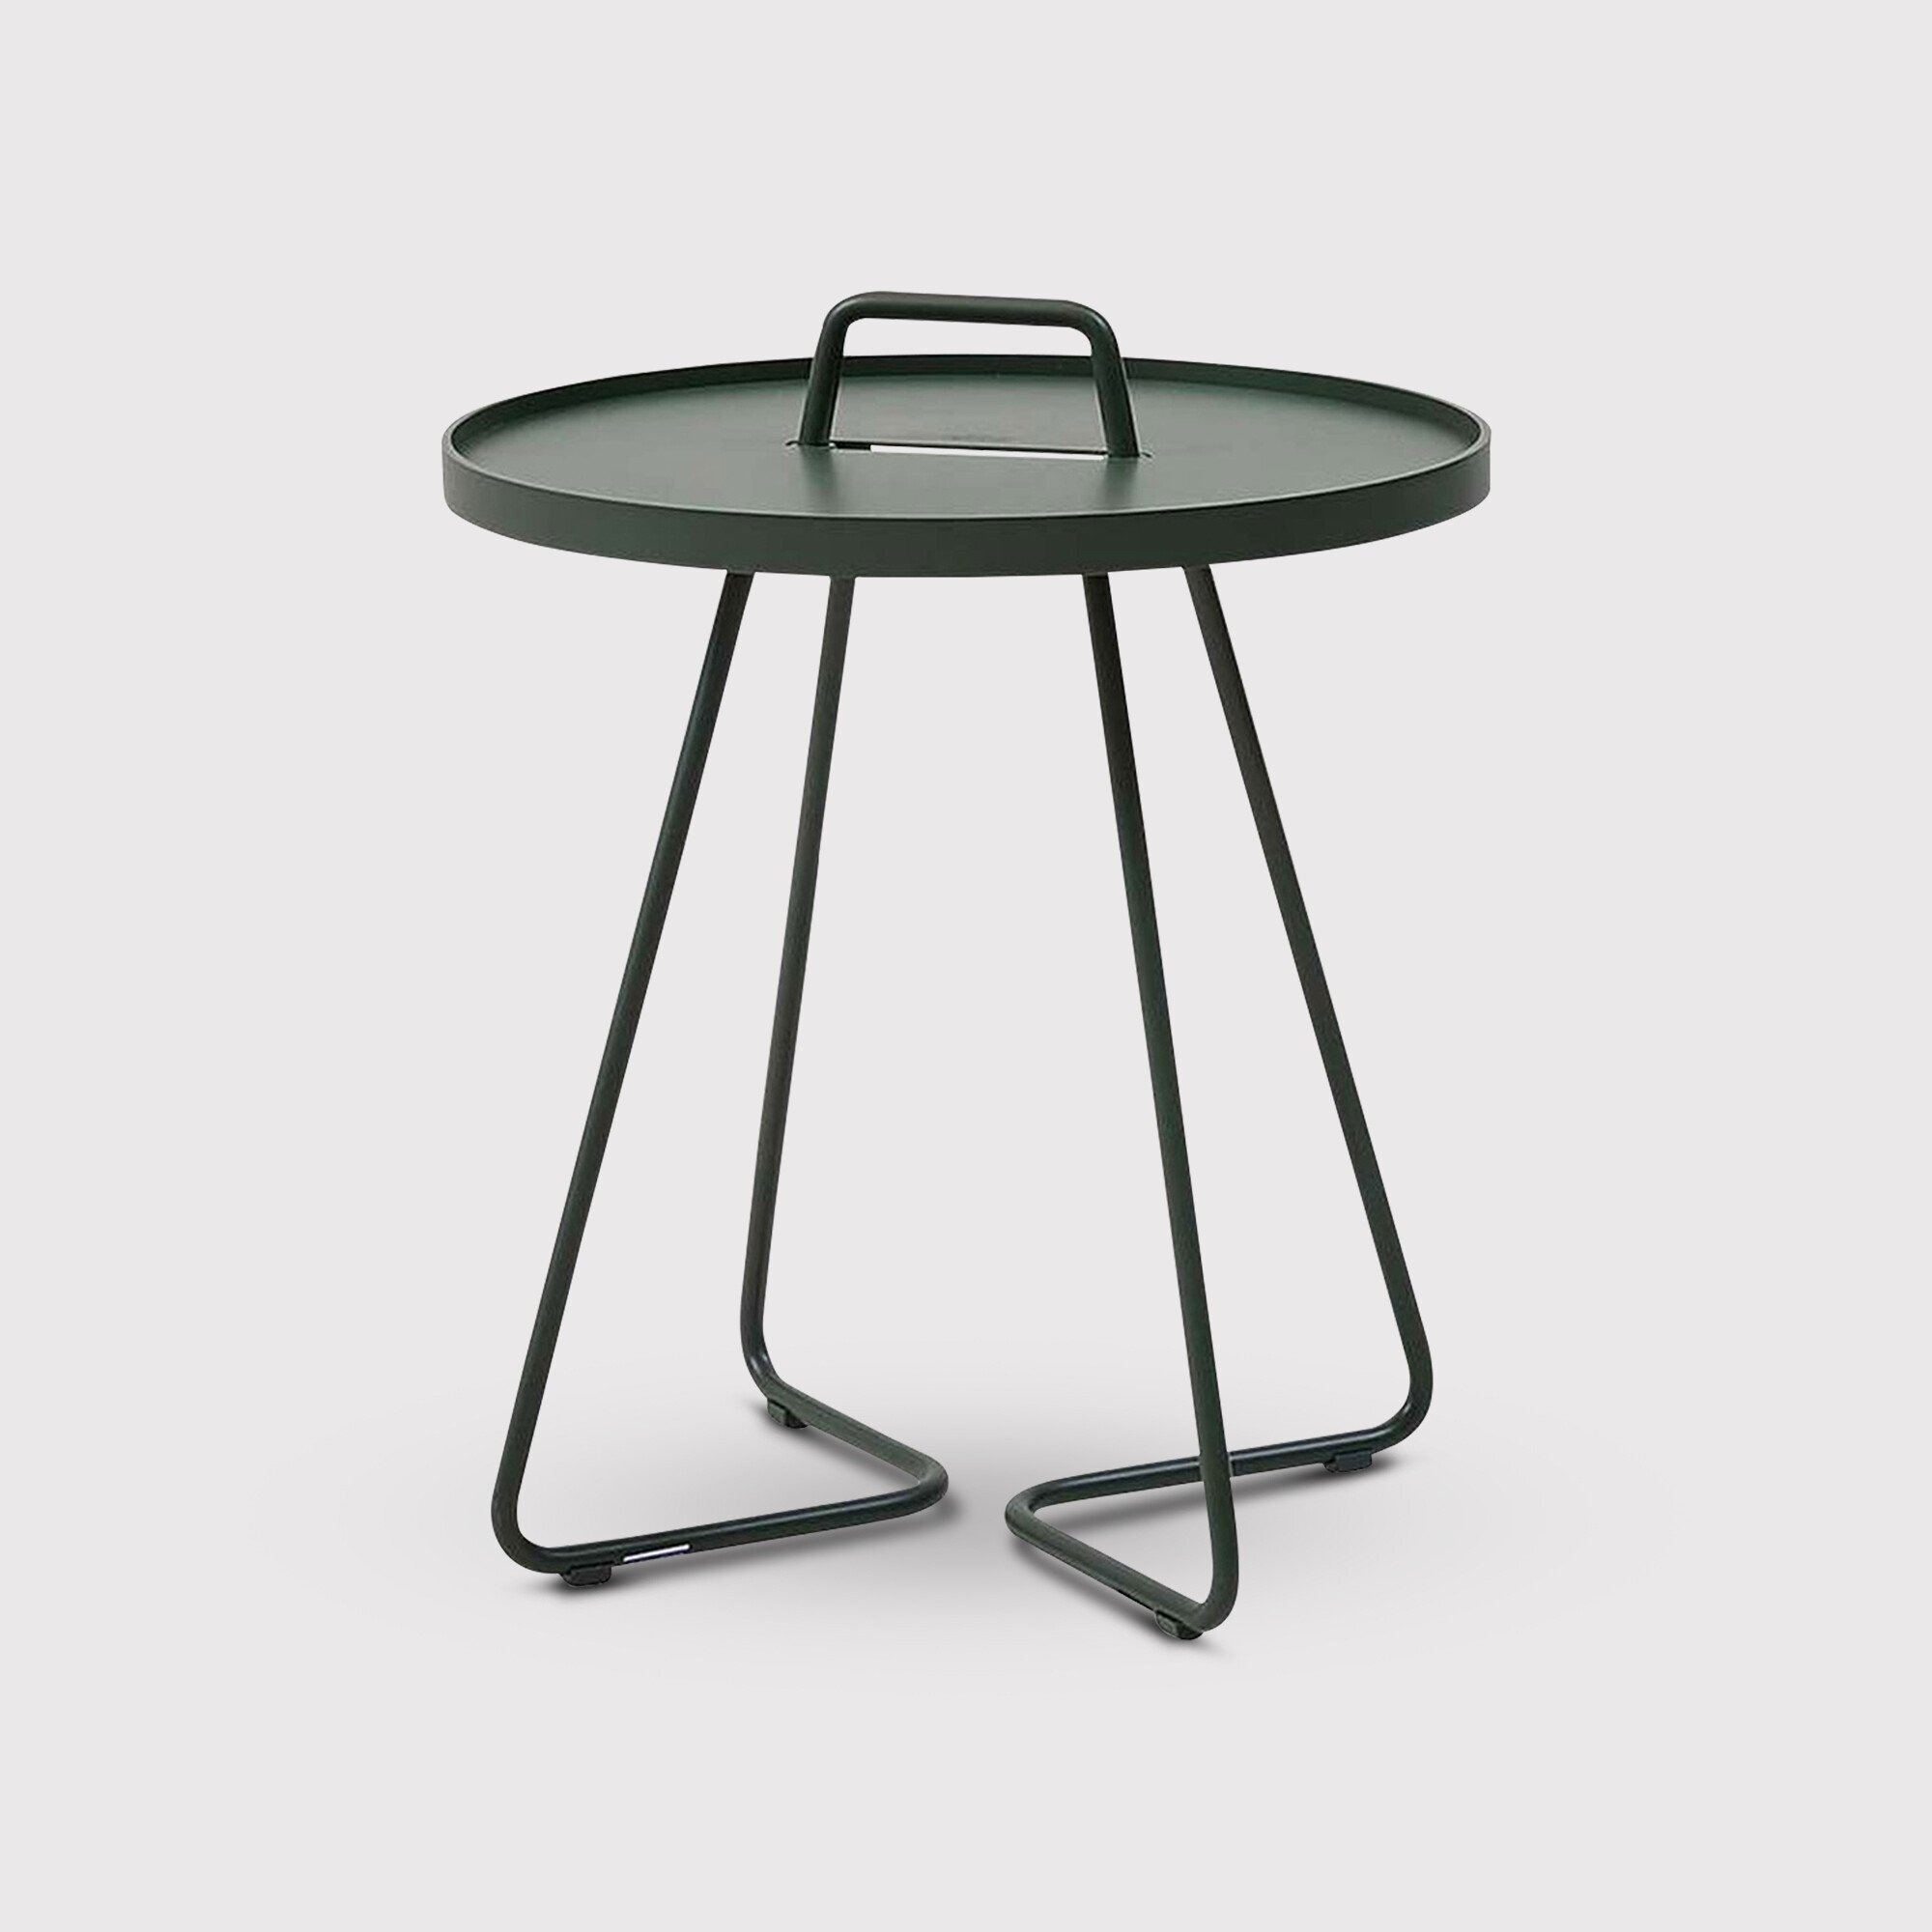 Cane Line On The Move Small Side Table, Round, Green Metal - Barker & Stonehouse - image 1